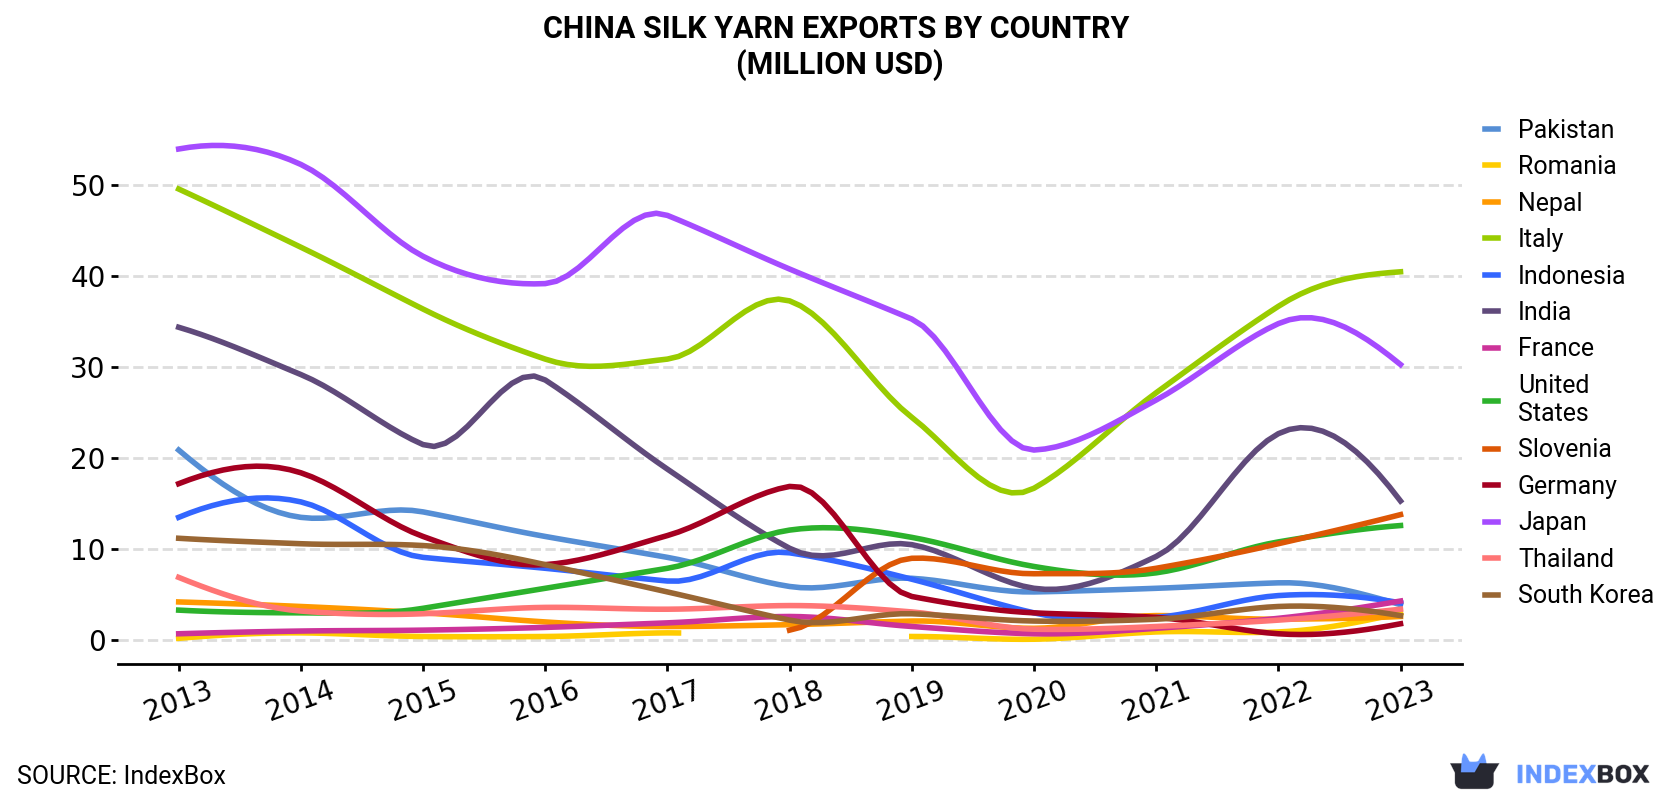 China Silk Yarn Exports By Country (Million USD)